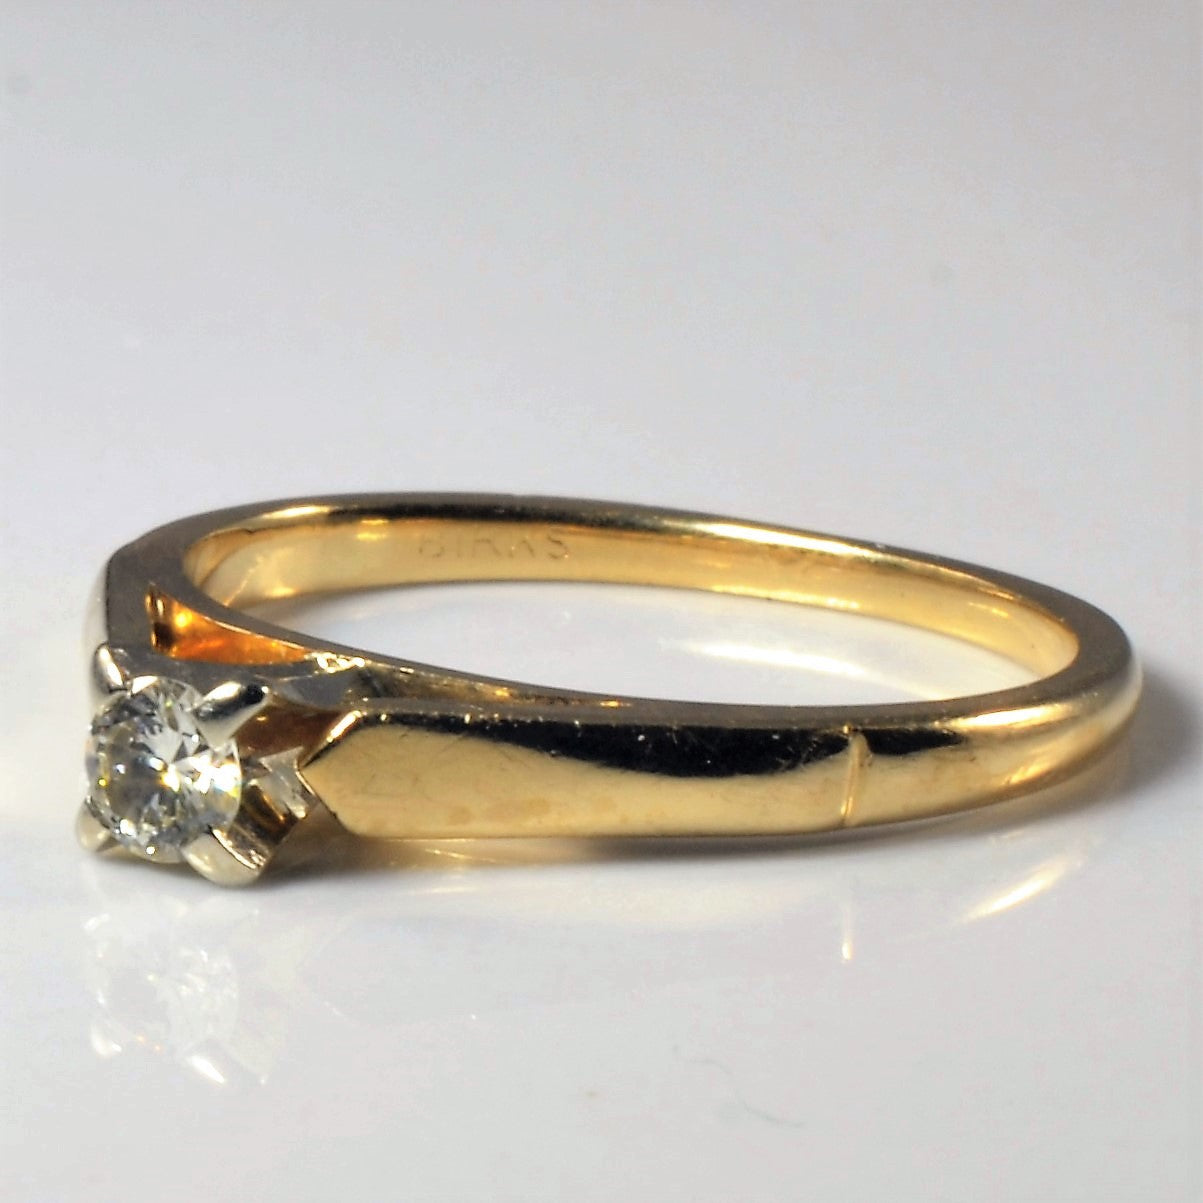 Birks' Tapered Solitaire Diamond Ring | 0.15ct | SZ 6.5 |